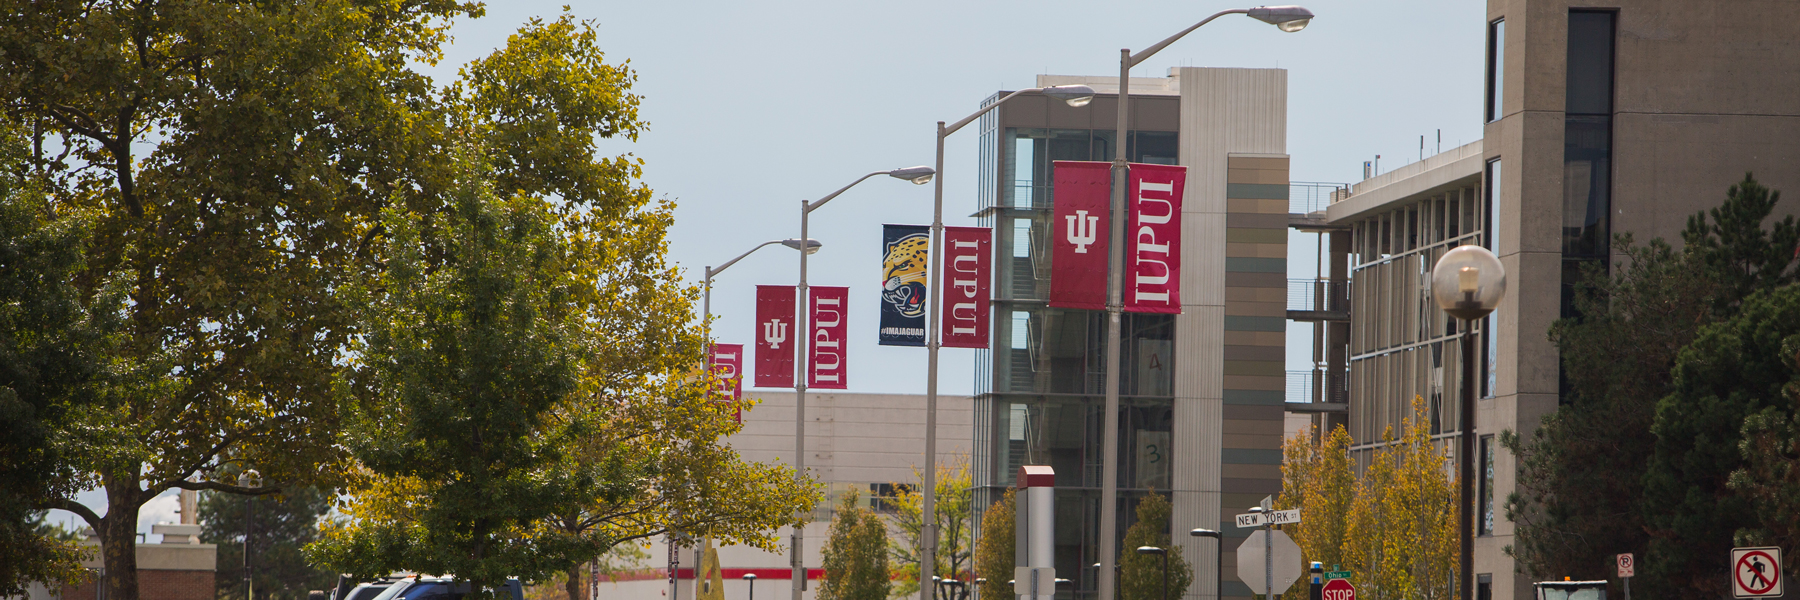 Outside picture of a parking garage and banners 